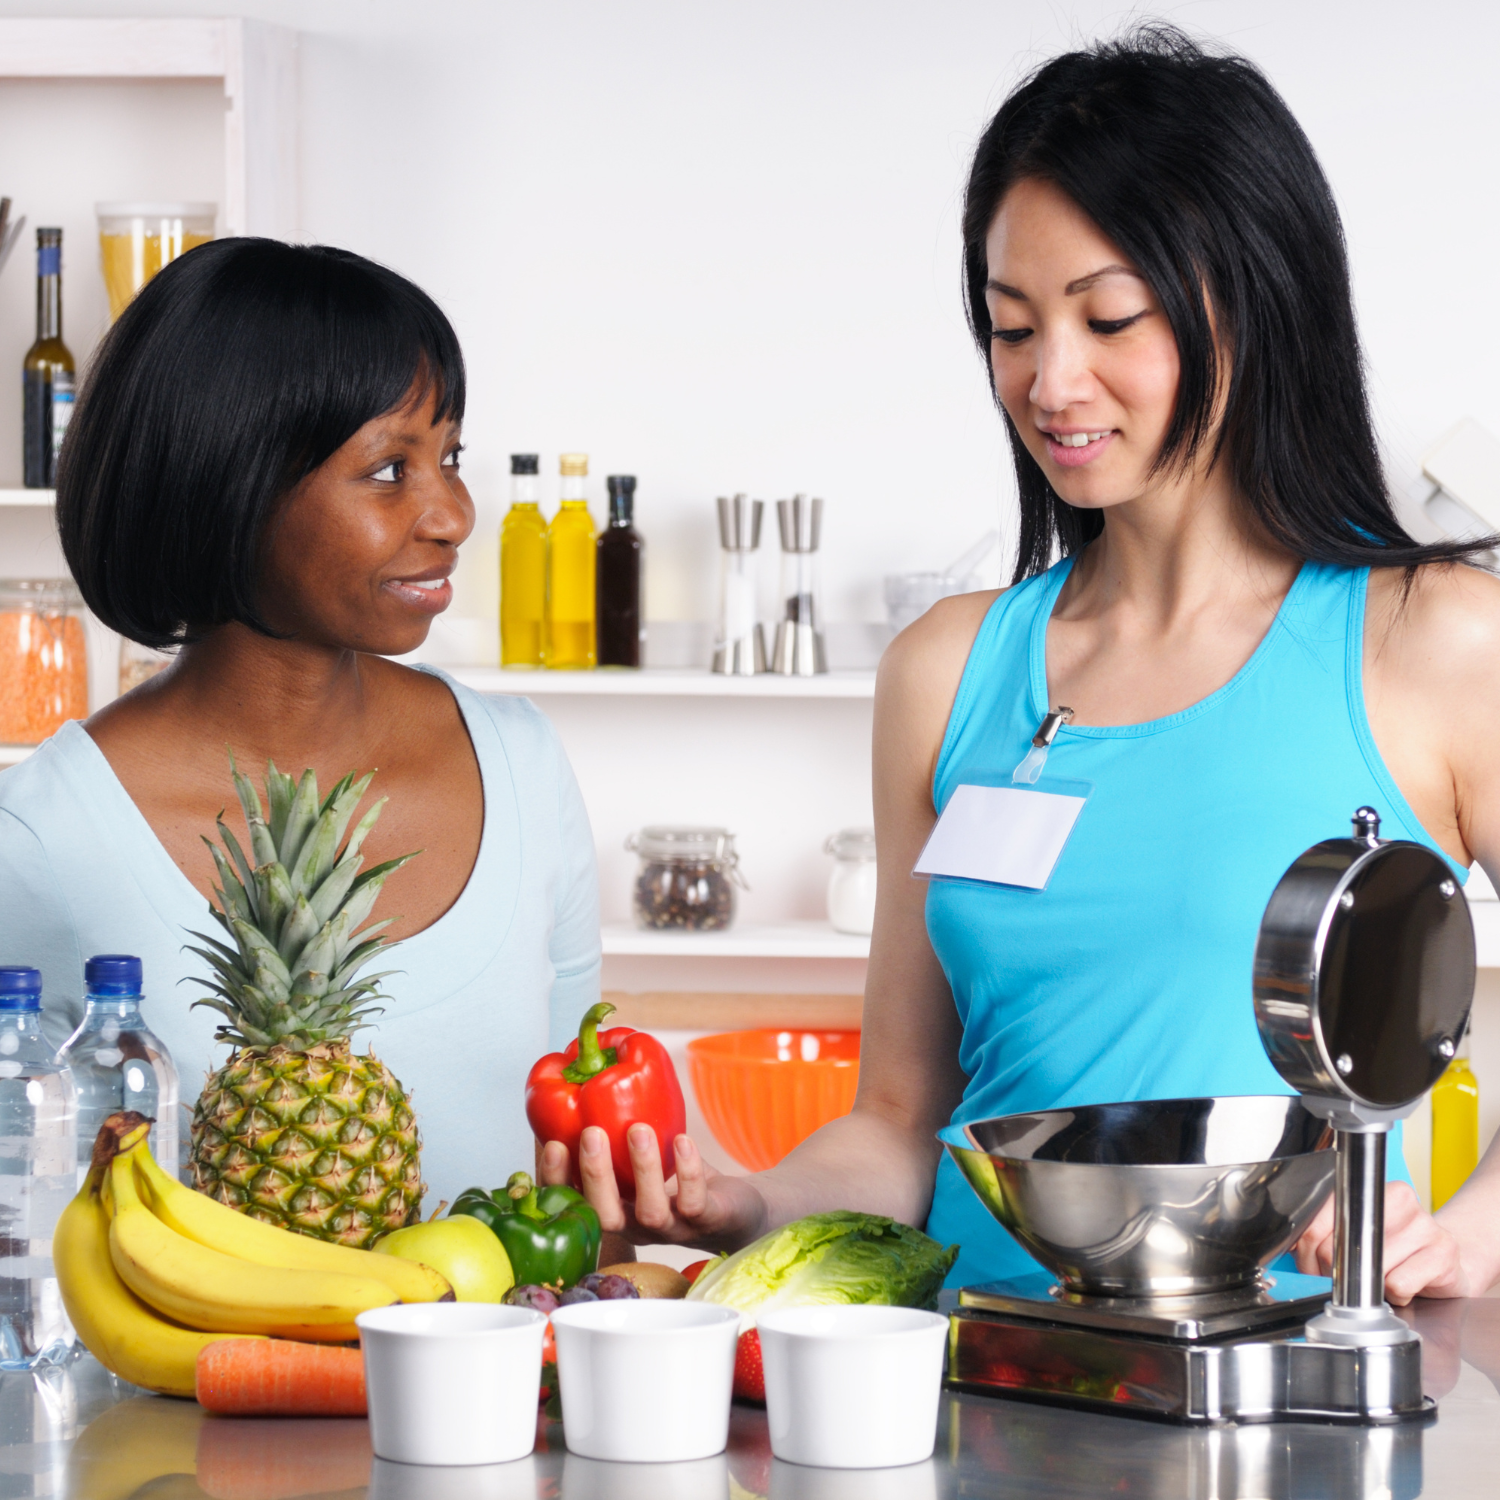 Female dietitian talking to female patient, with assortment of fruits and vegetables in front of them